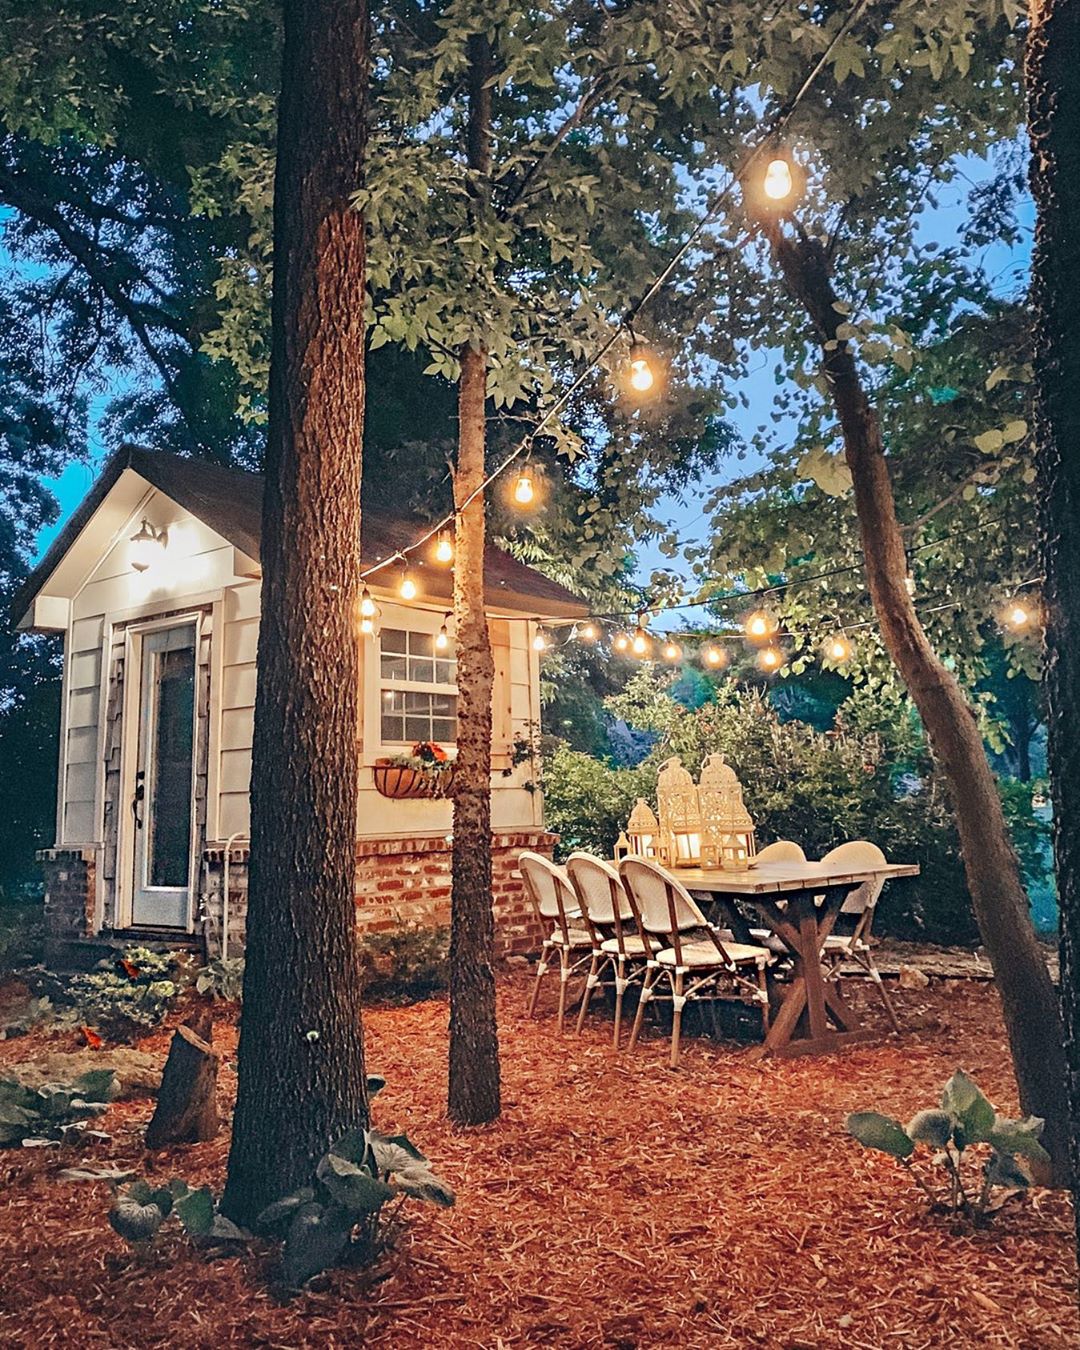 Small She Shed in the Trees with a Table and Chairs Nearby. Photo by Instagram user @cottonstem